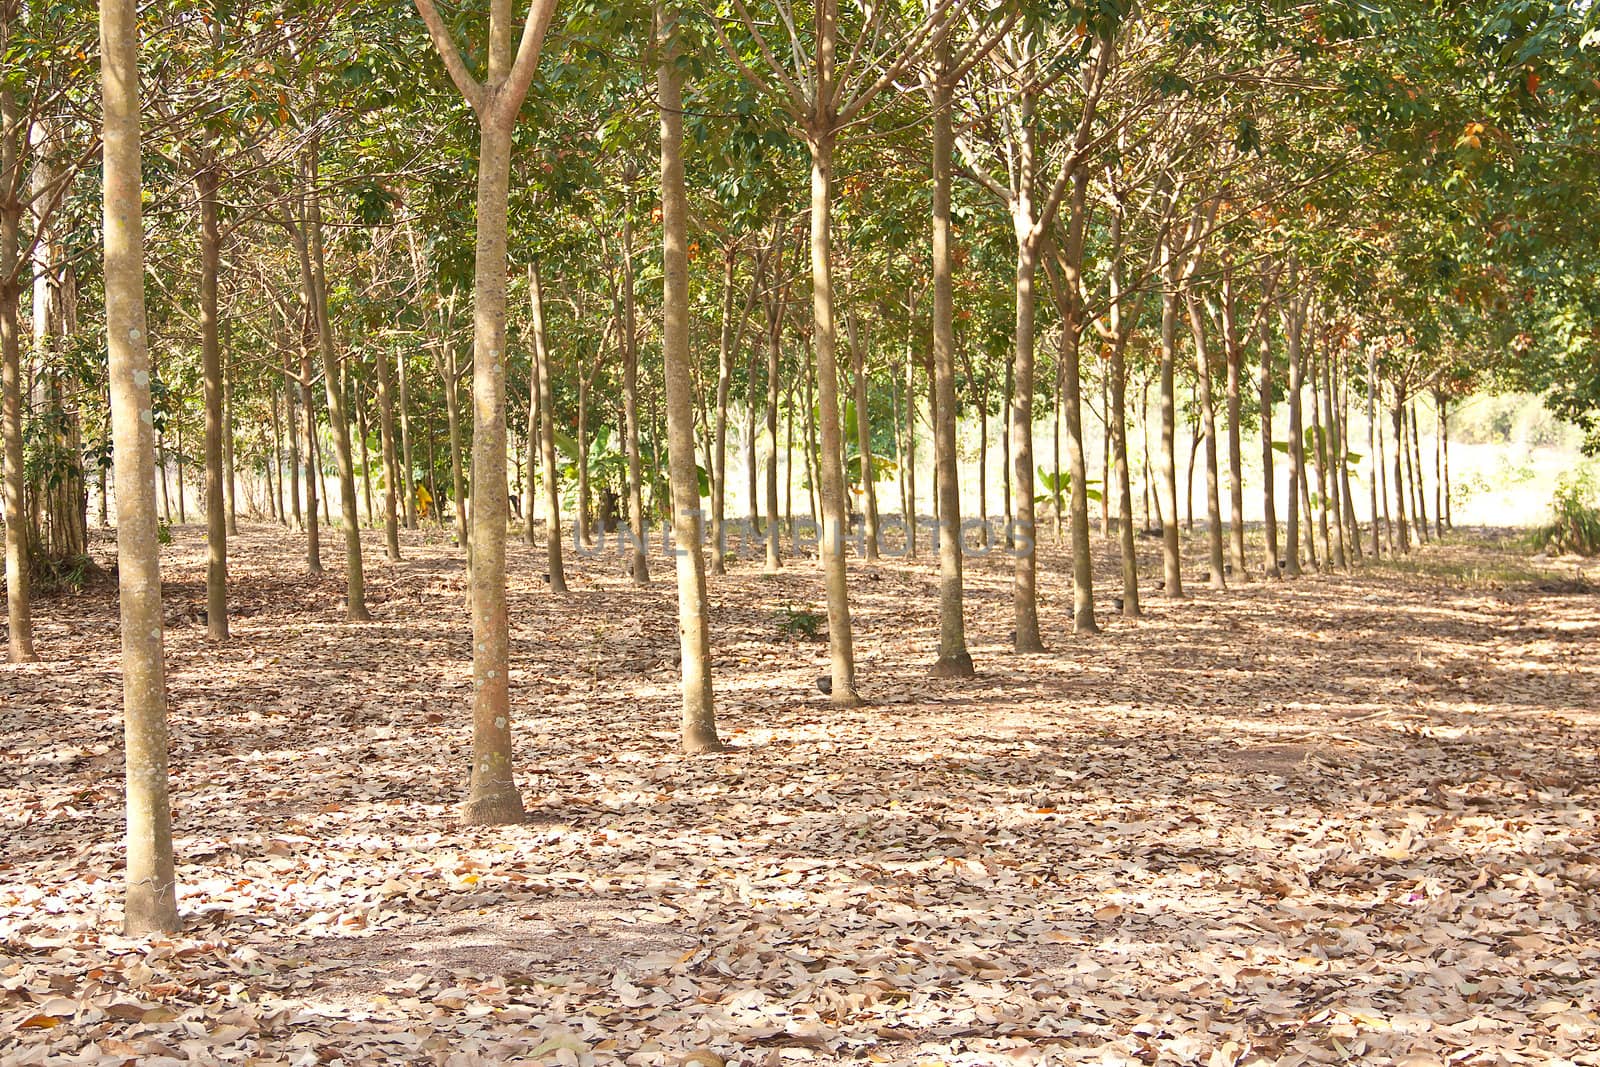 Rubber trees. by Theeraphon